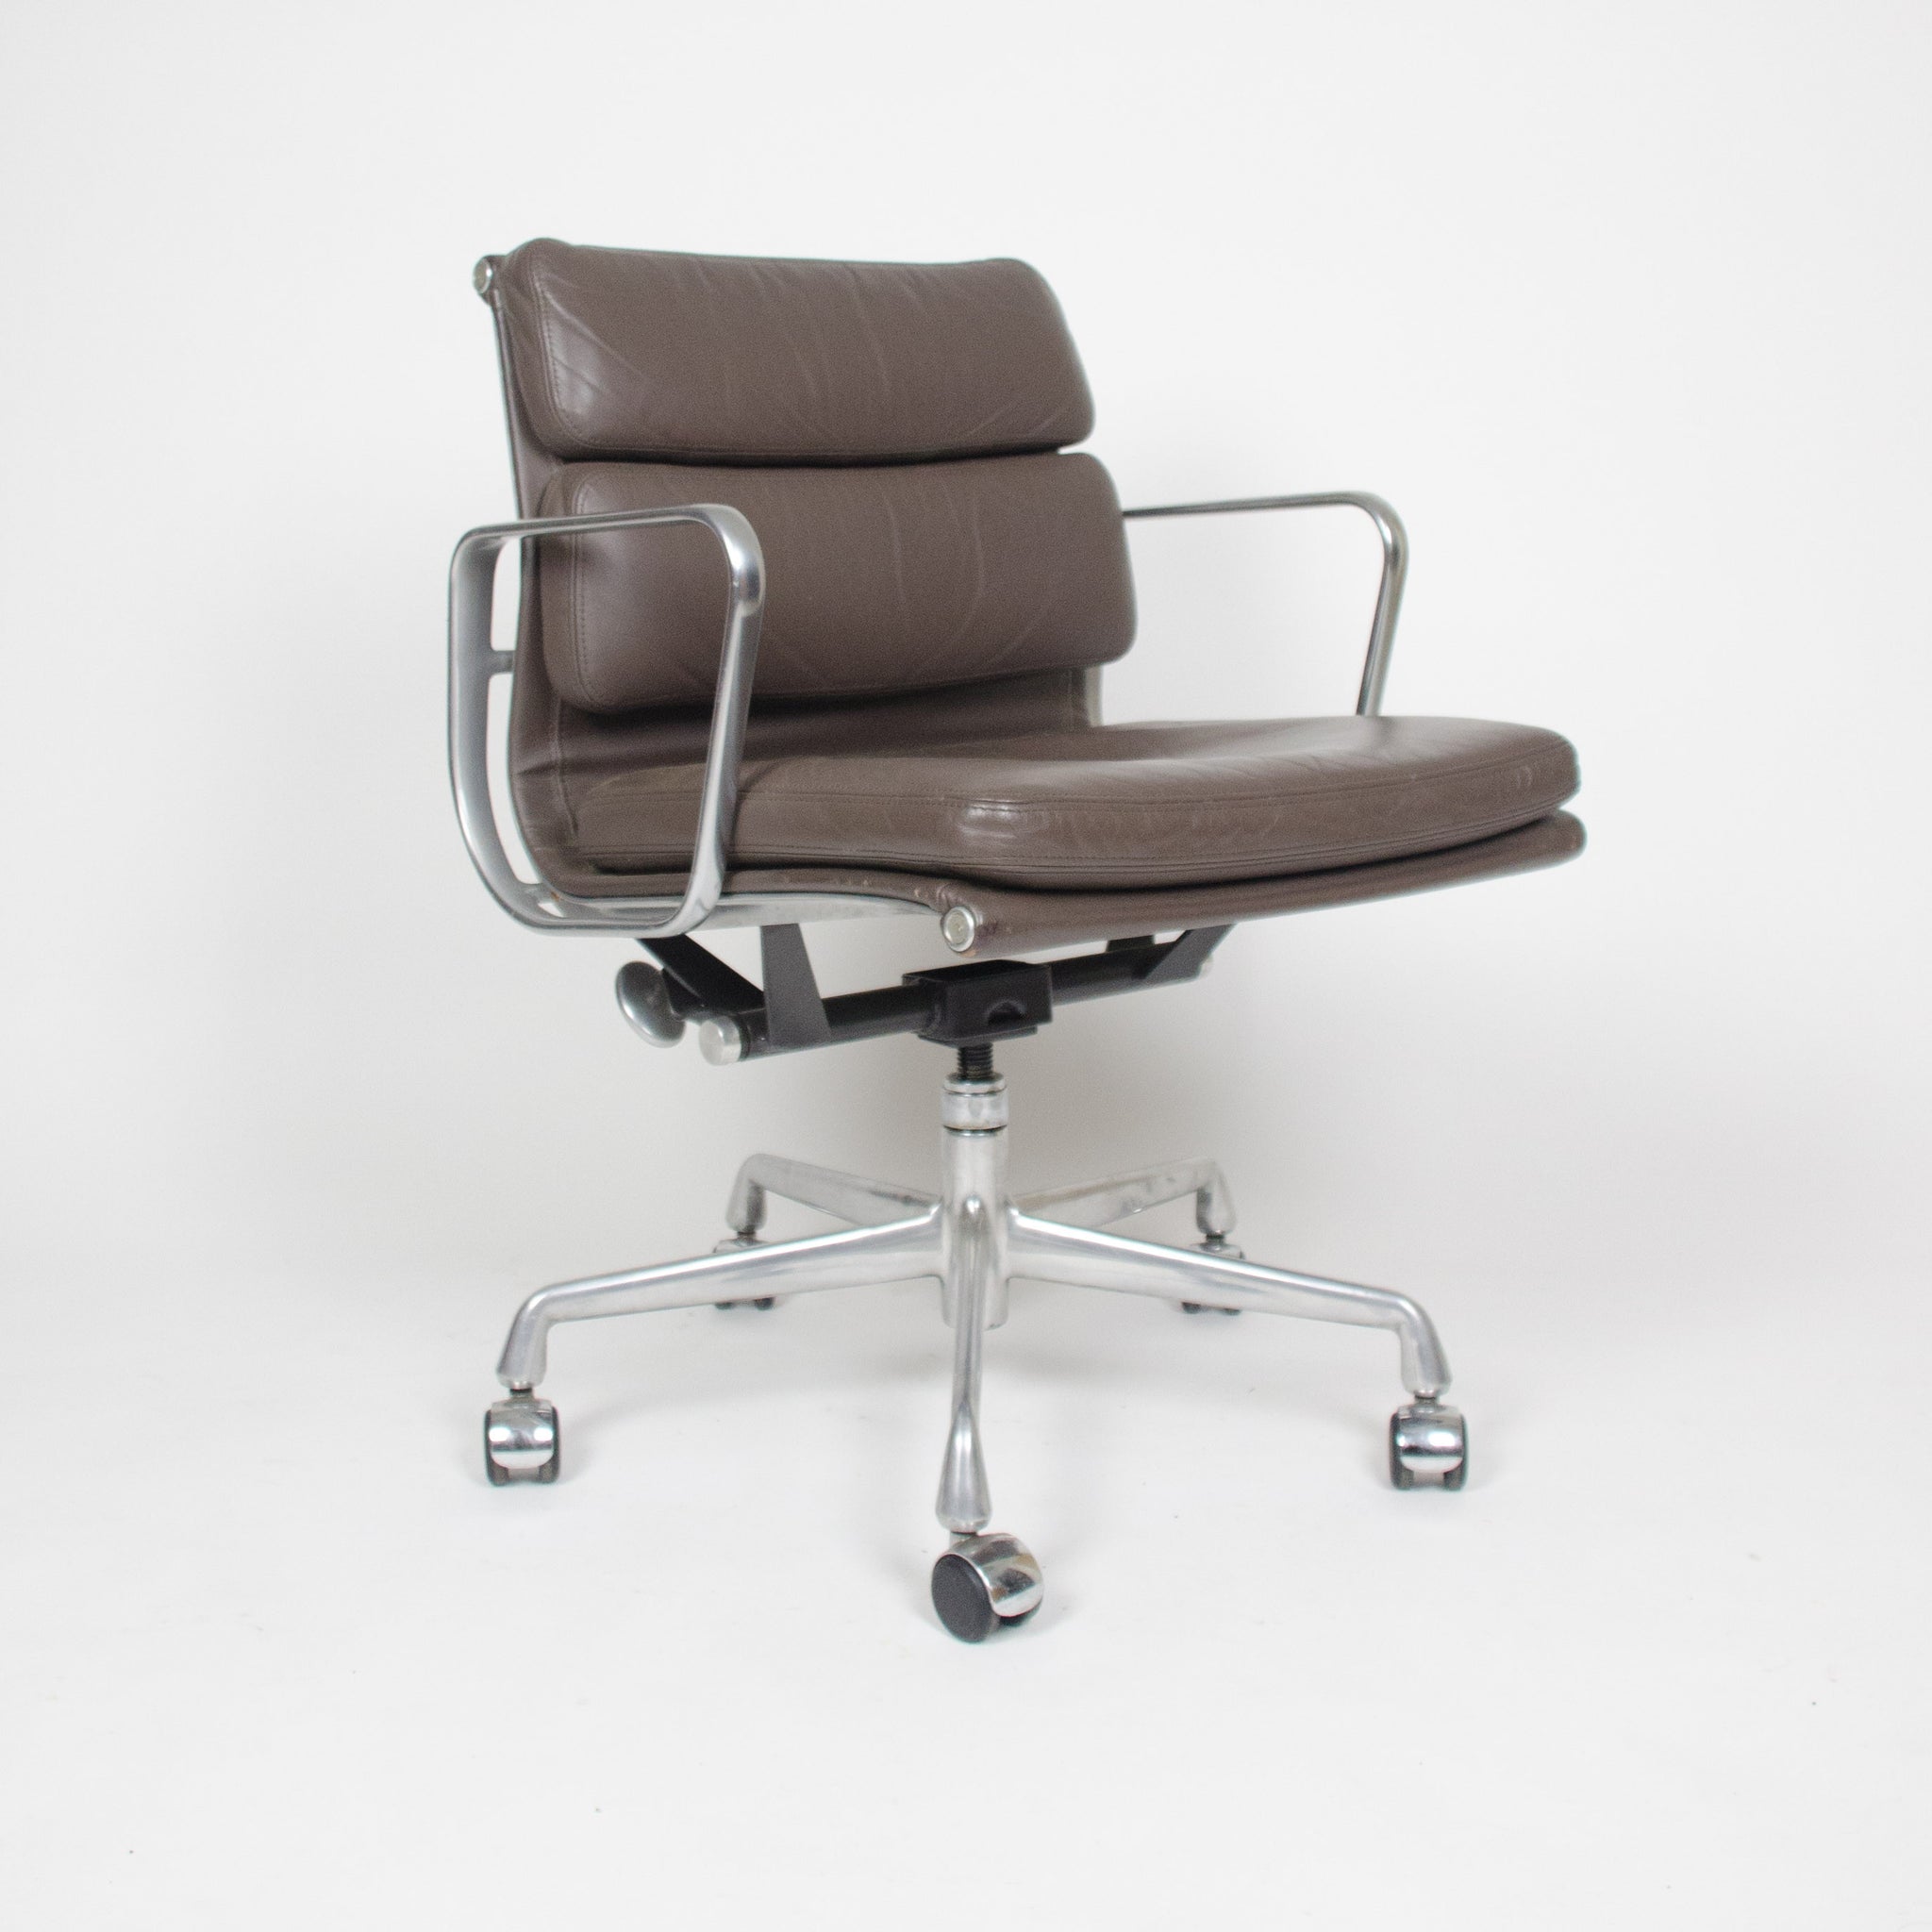 SOLD Eames Herman Miller Soft Pad Aluminum Group Chair Brown Leather Mint 3x